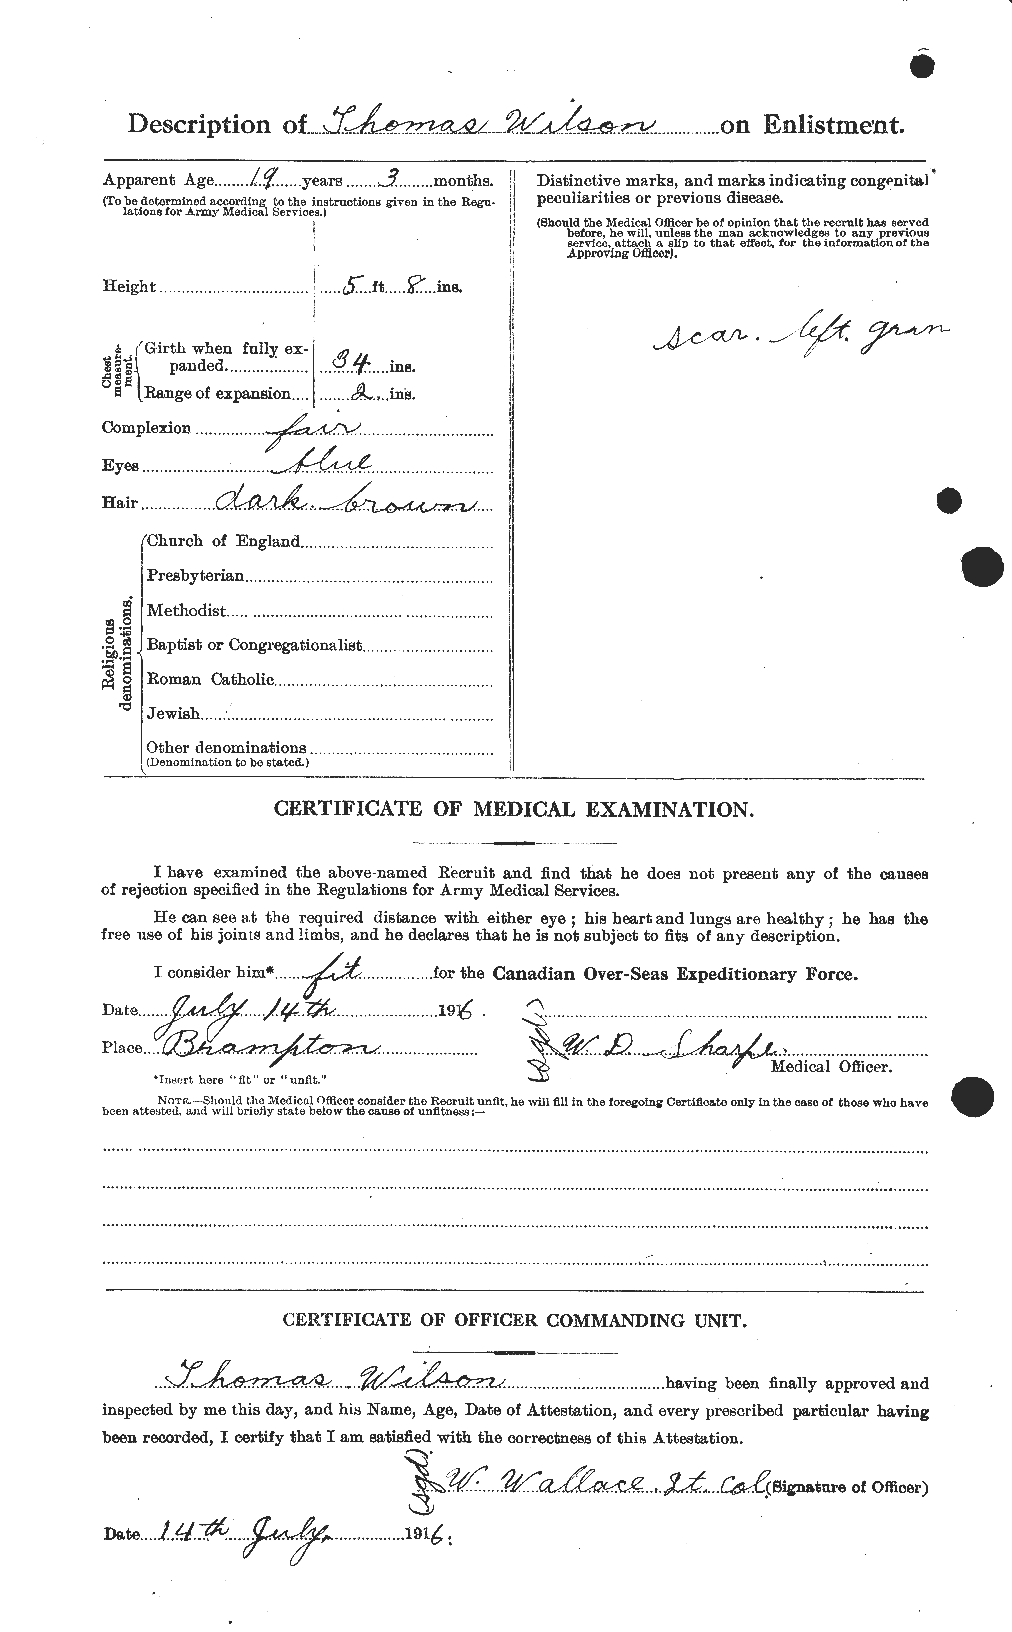 Personnel Records of the First World War - CEF 681201b